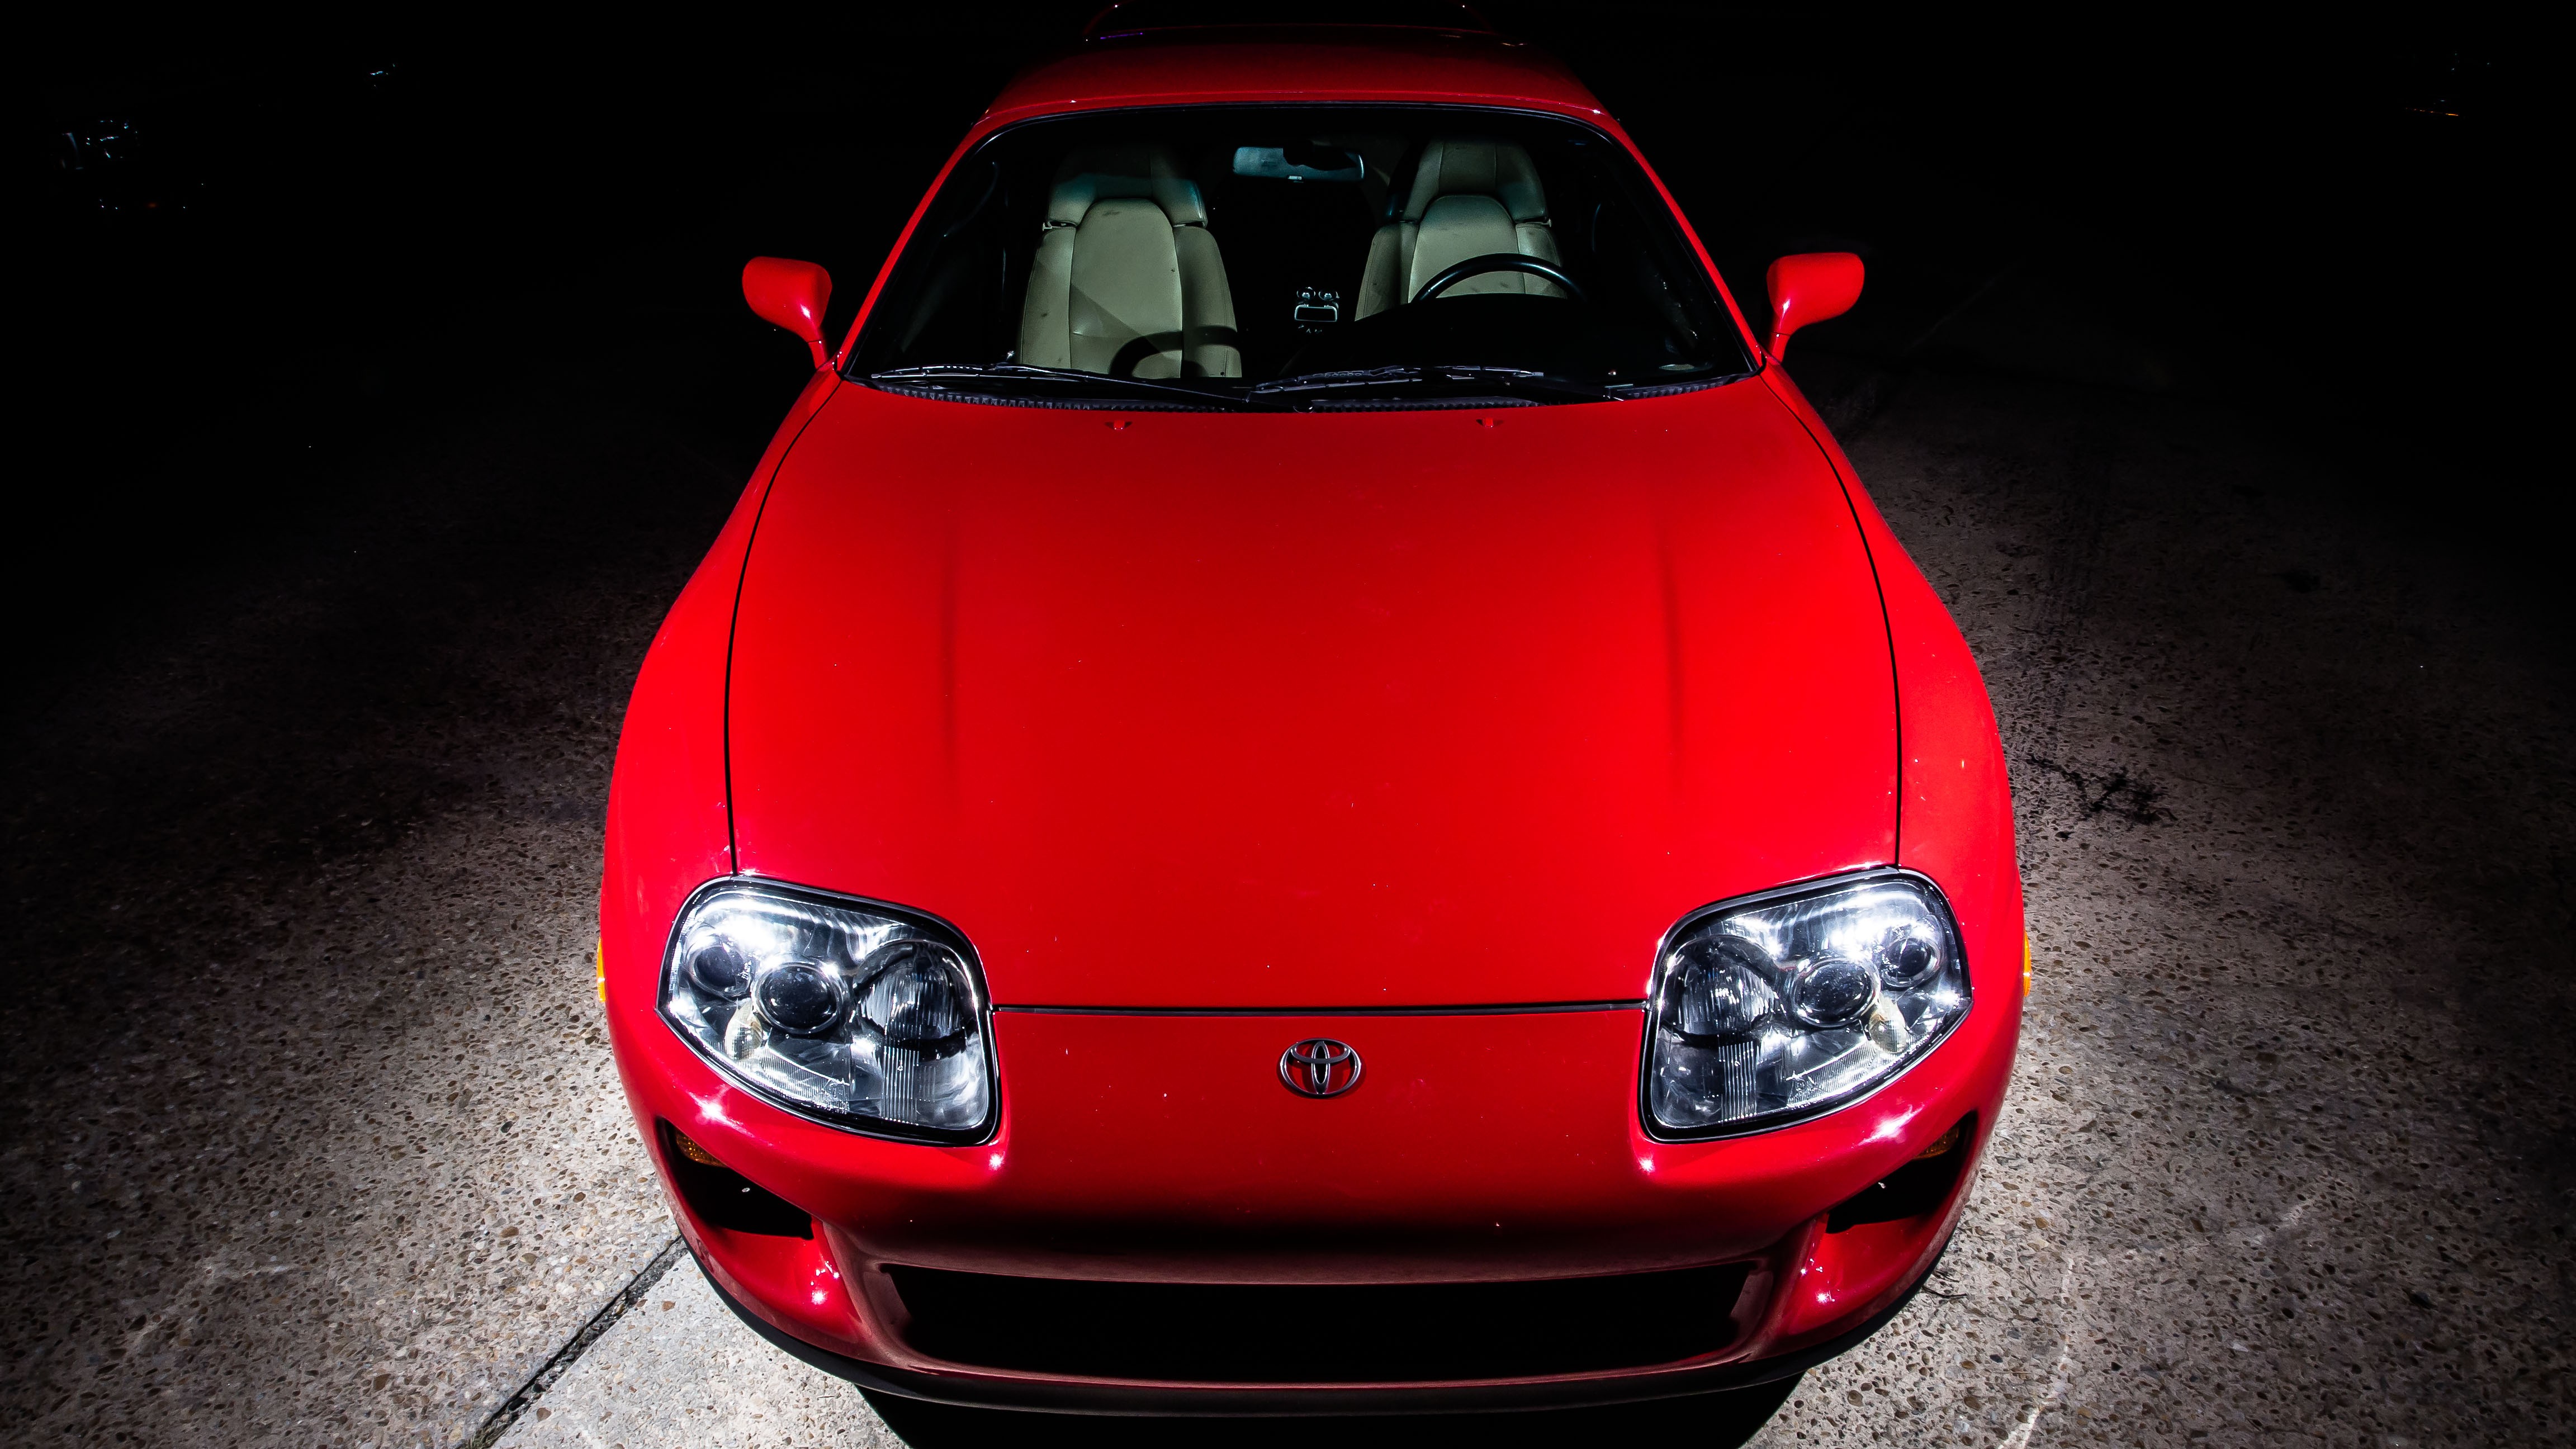 General 4608x2592 car vehicle Toyota red cars high angle frontal view Toyota Supra Toyota Supra A80 Japanese cars